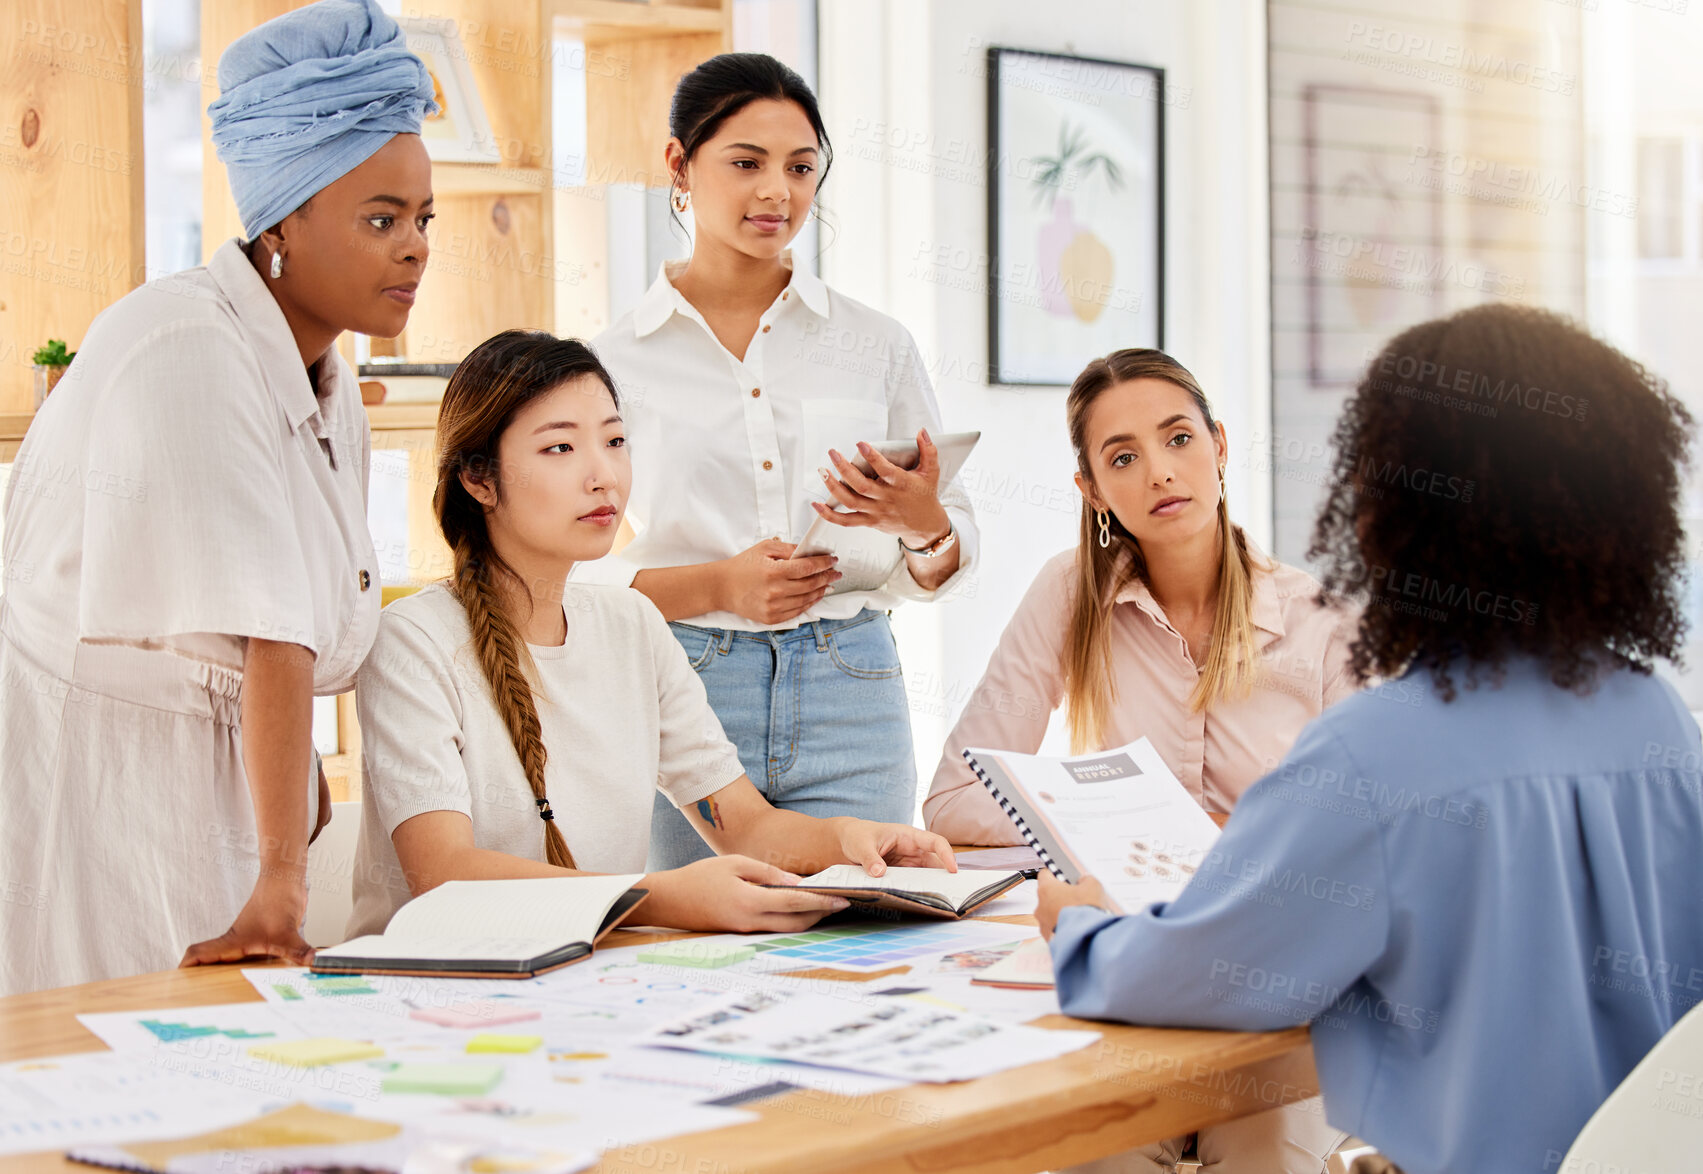 Buy stock photo Leadership, collaboration and teamwork with business woman in discussion with leader, planning creative strategy. Corporate employee sharing goal and vision on group project, inspired team motivation